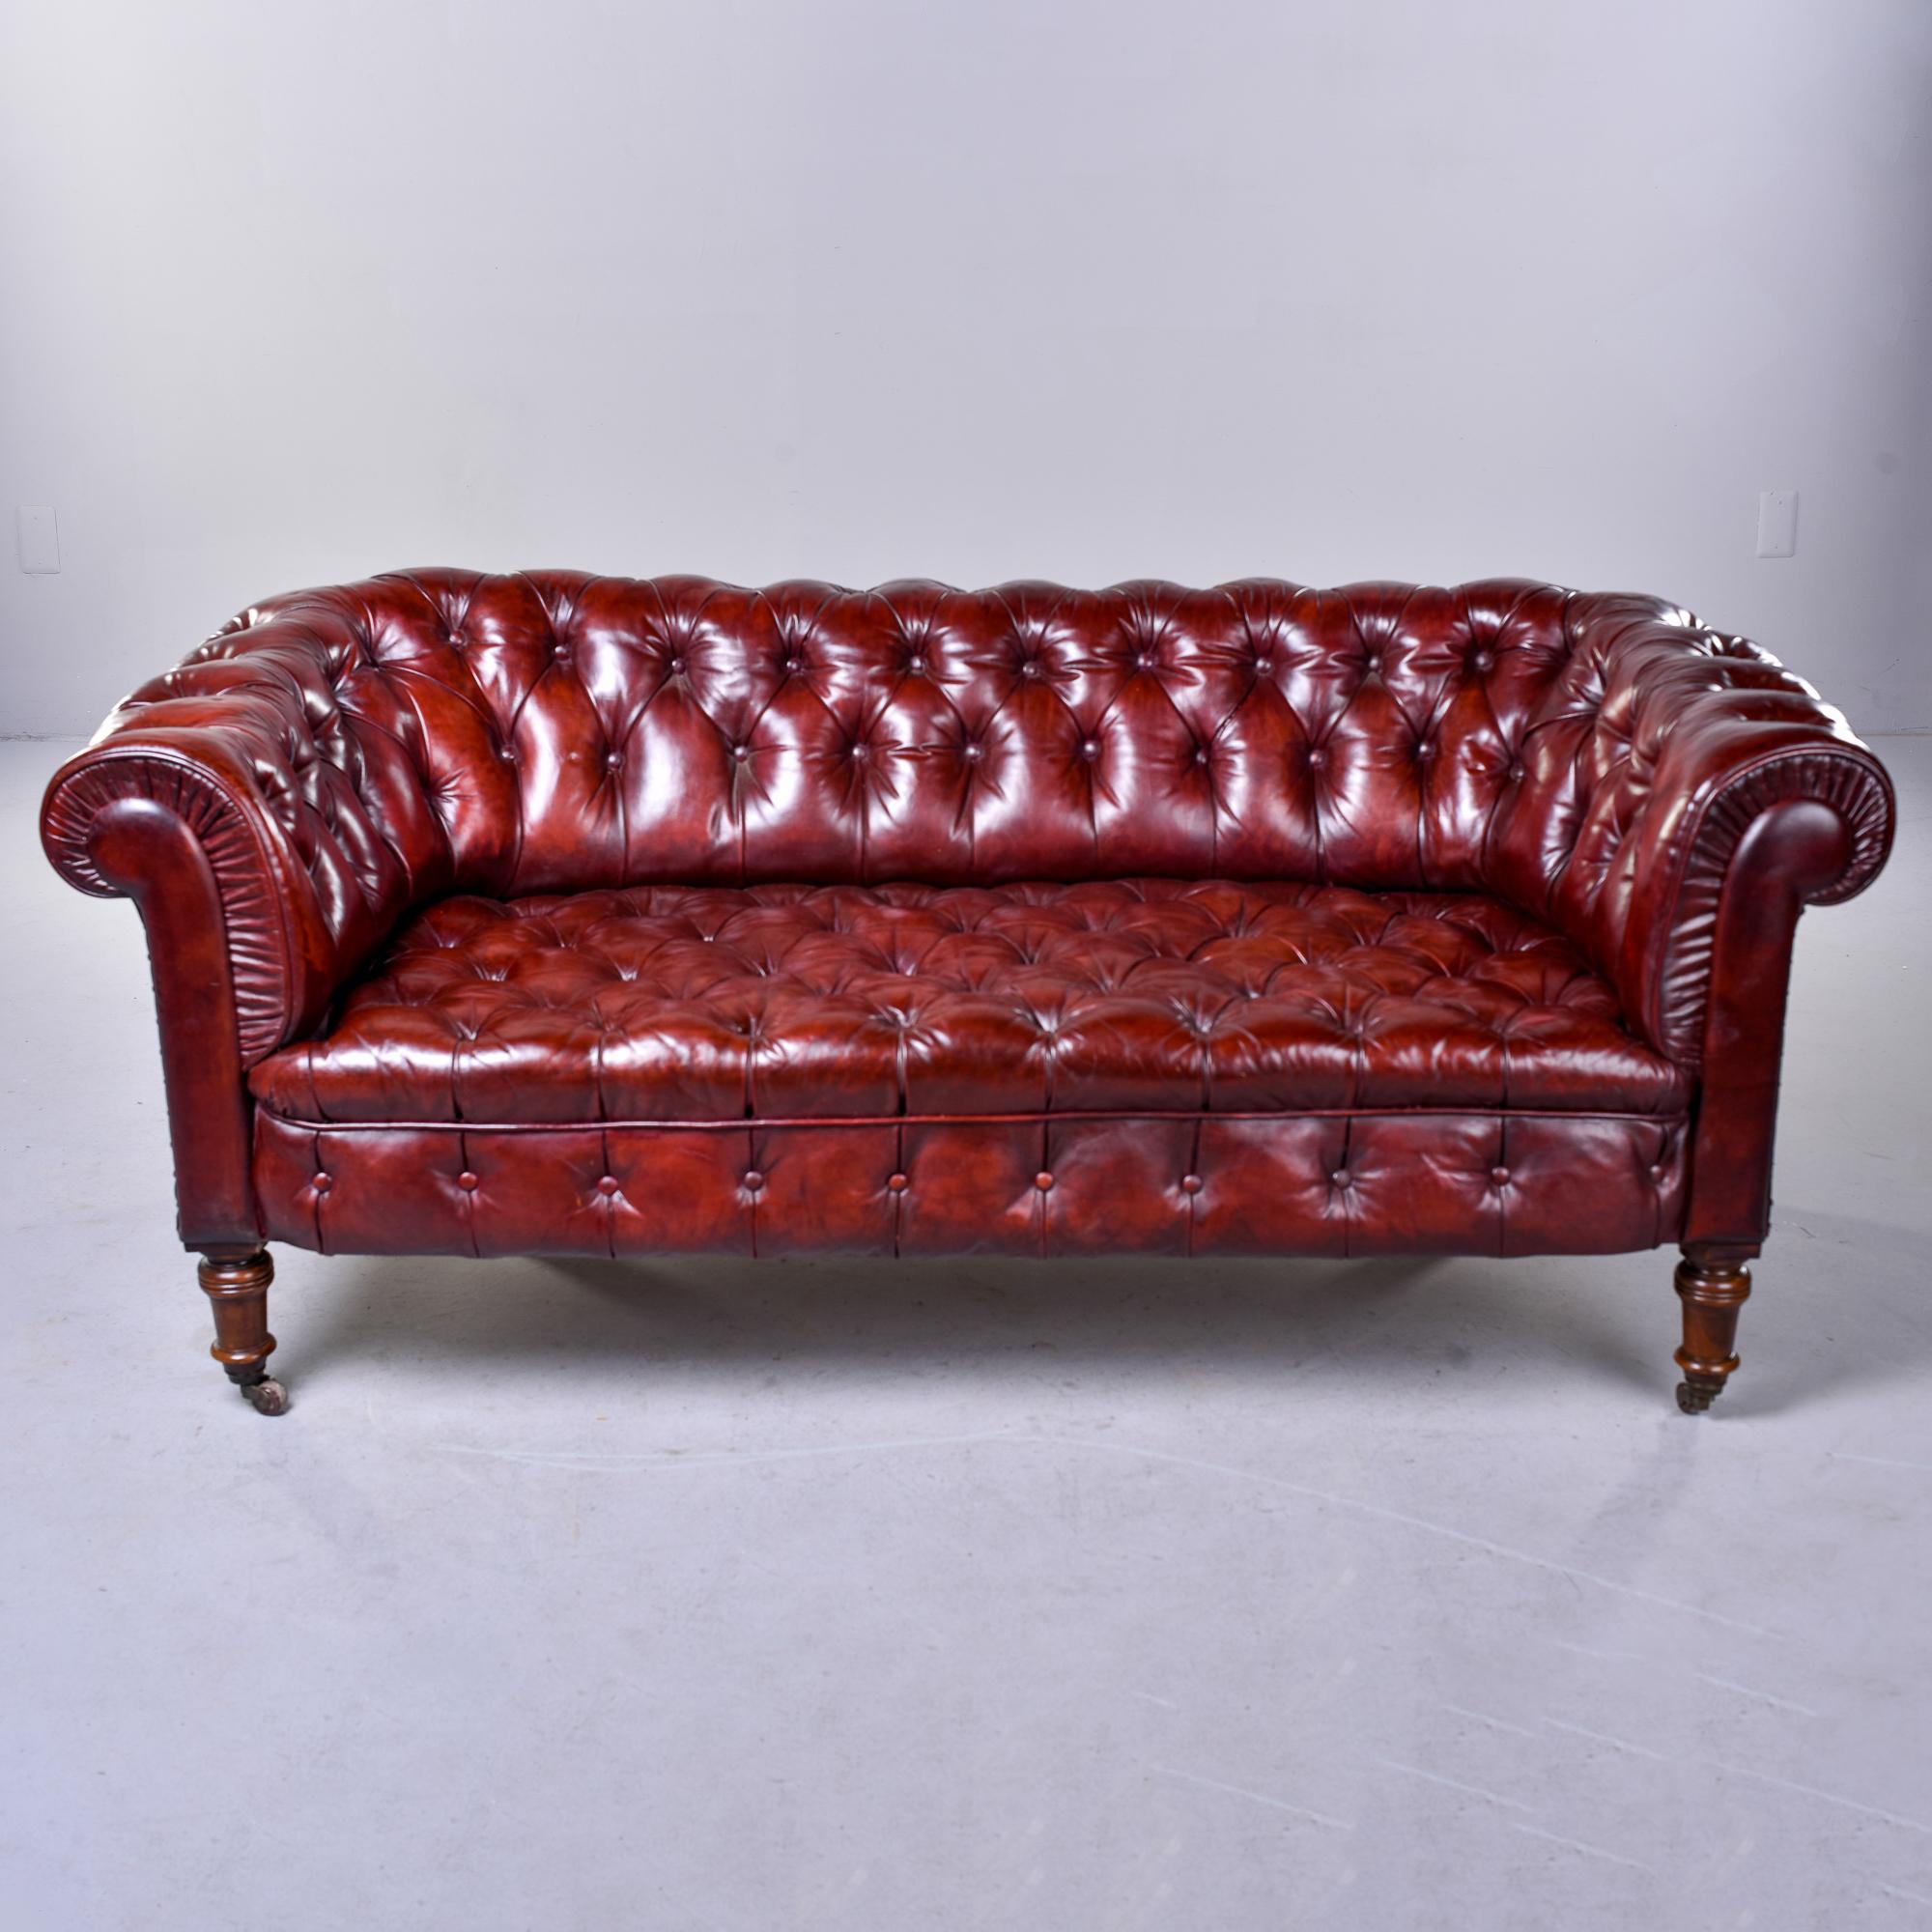 Found in England, this circa 1920’s cordovan colored leather chesterfield sofa features button tufting on the seat, backrest, and tops of the rolled arms. Front legs are turned wood; all four legs have original brass casters. Sofa is in very good